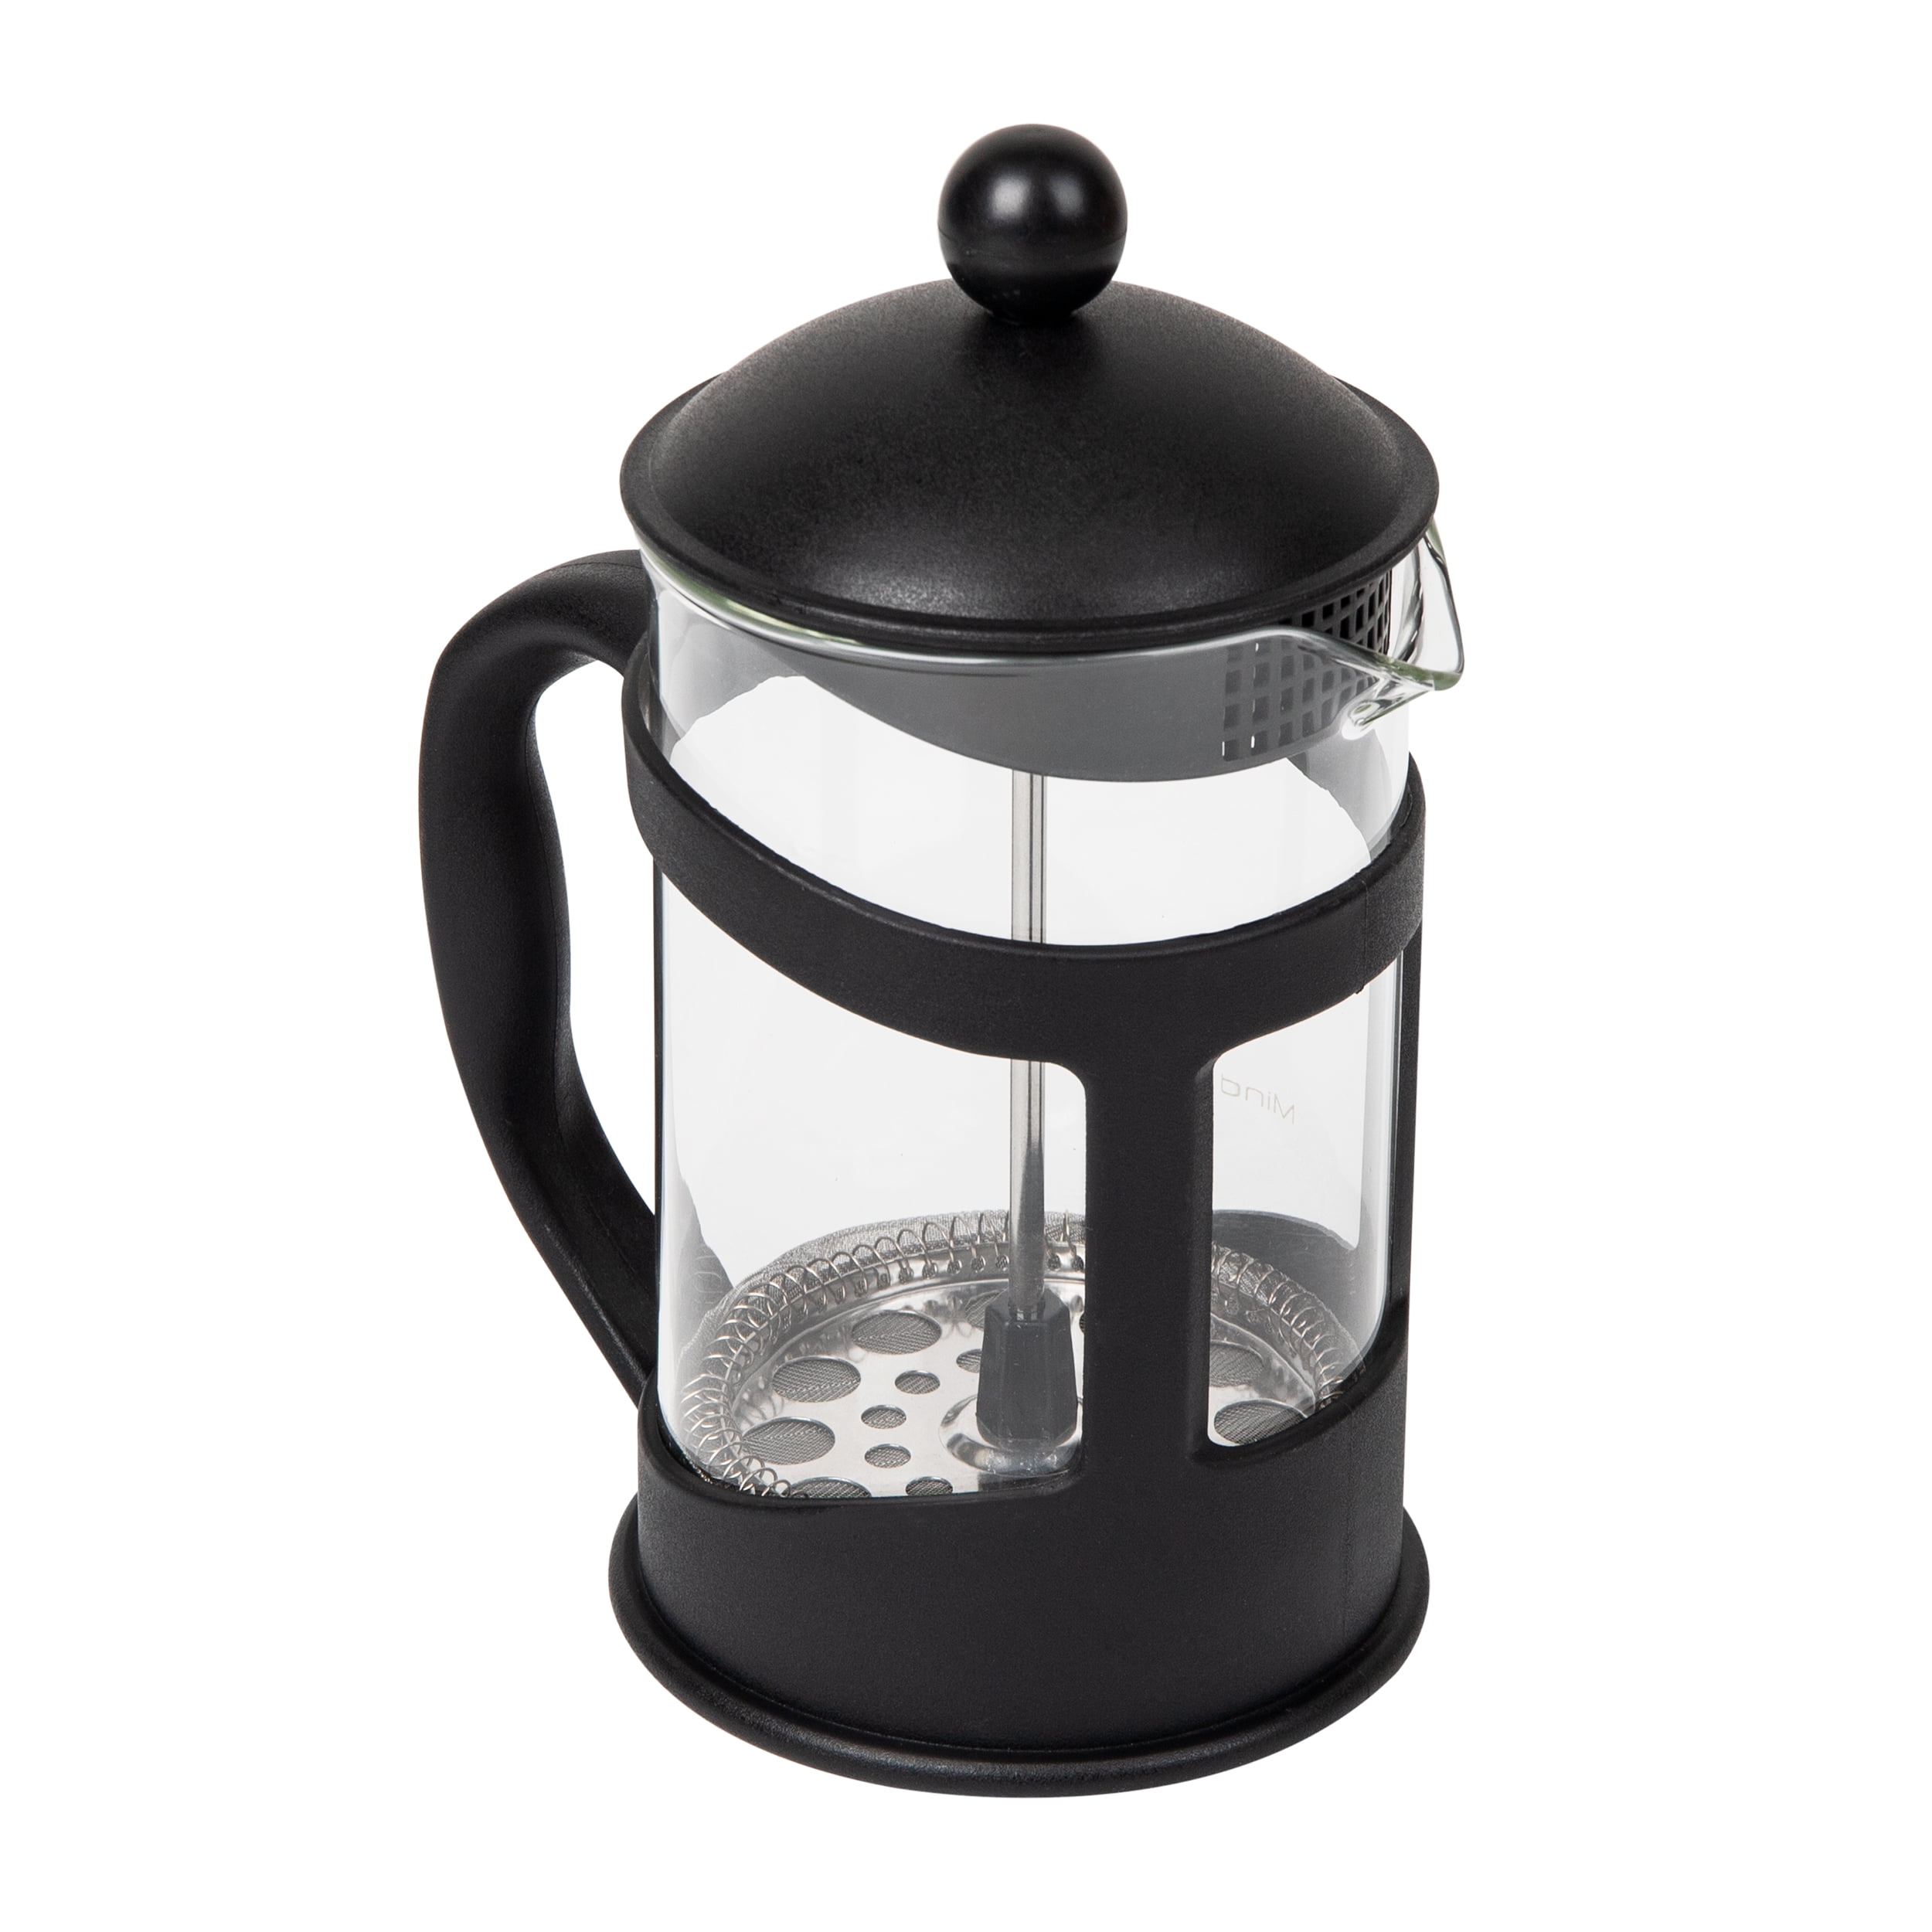 5 Common Beginner French Press Coffee Questions Answered - JavaPresse Coffee  Company